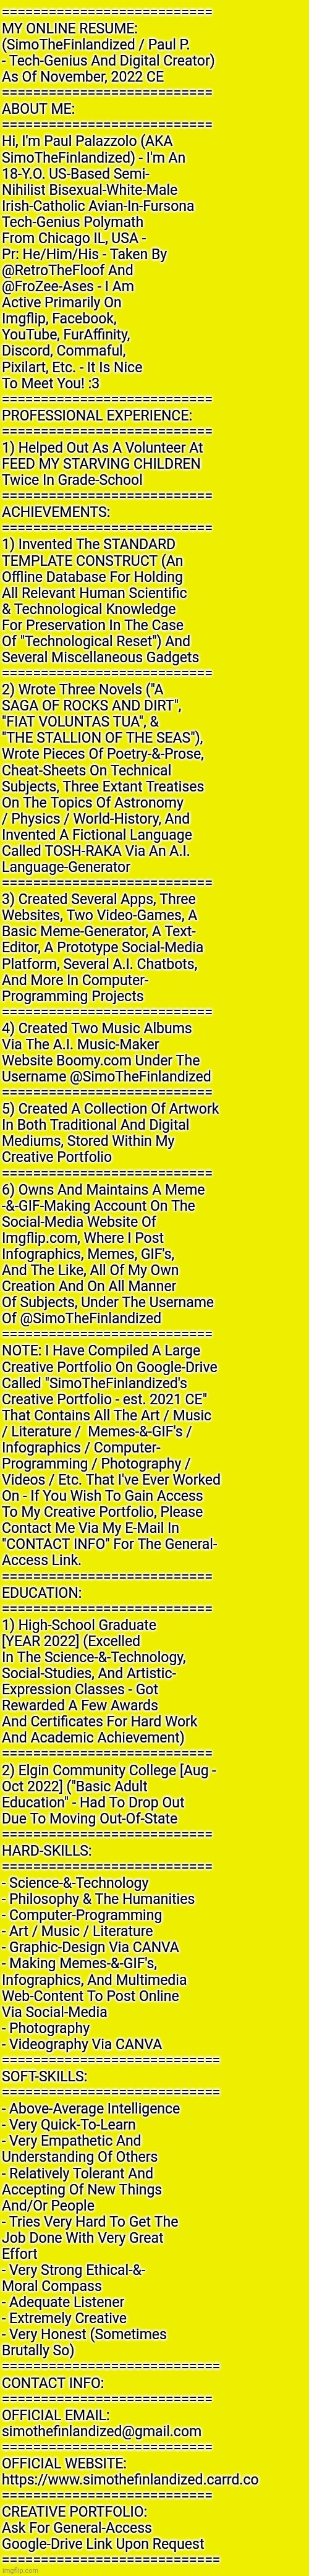 MY ONLINE RESUME: By SimoTheFinlandized / Paul P. - Nov. 2022 CE | ===========================
MY ONLINE RESUME:
(SimoTheFinlandized / Paul P.
- Tech-Genius And Digital Creator)
As Of November, 2022 CE
===========================
ABOUT ME:
===========================
Hi, I'm Paul Palazzolo (AKA
SimoTheFinlandized) - I'm An
18-Y.O. US-Based Semi-
Nihilist Bisexual-White-Male
Irish-Catholic Avian-In-Fursona
Tech-Genius Polymath
From Chicago IL, USA -
Pr: He/Him/His - Taken By
@RetroTheFloof And
@FroZee-Ases - I Am
Active Primarily On
Imgflip, Facebook,
YouTube, FurAffinity,
Discord, Commaful,
Pixilart, Etc. - It Is Nice
To Meet You! :3
===========================
PROFESSIONAL EXPERIENCE:
===========================
1) Helped Out As A Volunteer At 
FEED MY STARVING CHILDREN 
Twice In Grade-School
===========================
ACHIEVEMENTS:
===========================
1) Invented The STANDARD 
TEMPLATE CONSTRUCT (An 
Offline Database For Holding 
All Relevant Human Scientific 
& Technological Knowledge 
For Preservation In The Case 
Of "Technological Reset") And
Several Miscellaneous Gadgets
===========================
2) Wrote Three Novels ("A 
SAGA OF ROCKS AND DIRT", 
"FIAT VOLUNTAS TUA", & 
"THE STALLION OF THE SEAS"),
Wrote Pieces Of Poetry-&-Prose,
Cheat-Sheets On Technical 
Subjects, Three Extant Treatises 
On The Topics Of Astronomy 
/ Physics / World-History, And 
Invented A Fictional Language 
Called TOSH-RAKA Via An A.I. 
Language-Generator
===========================
3) Created Several Apps, Three 
Websites, Two Video-Games, A 
Basic Meme-Generator, A Text-
Editor, A Prototype Social-Media 
Platform, Several A.I. Chatbots, 
And More In Computer-
Programming Projects
===========================
4) Created Two Music Albums 
Via The A.I. Music-Maker 
Website Boomy.com Under The 
Username @SimoTheFinlandized 
===========================
5) Created A Collection Of Artwork 
In Both Traditional And Digital 
Mediums, Stored Within My
Creative Portfolio
===========================
6) Owns And Maintains A Meme
-&-GIF-Making Account On The 
Social-Media Website Of 
Imgflip.com, Where I Post 
Infographics, Memes, GIF's, 
And The Like, All Of My Own 
Creation And On All Manner 
Of Subjects, Under The Username 
Of @SimoTheFinlandized 
===========================
NOTE: I Have Compiled A Large
Creative Portfolio On Google-Drive 
Called "SimoTheFinlandized's 
Creative Portfolio - est. 2021 CE"
That Contains All The Art / Music
/ Literature /  Memes-&-GIF's / 
Infographics / Computer-
Programming / Photography / 
Videos / Etc. That I've Ever Worked
On - If You Wish To Gain Access 
To My Creative Portfolio, Please 
Contact Me Via My E-Mail In 
"CONTACT INFO" For The General-
Access Link. 
===========================
EDUCATION:
===========================
1) High-School Graduate 
[YEAR 2022] (Excelled 
In The Science-&-Technology, 
Social-Studies, And Artistic-
Expression Classes - Got 
Rewarded A Few Awards 
And Certificates For Hard Work
And Academic Achievement)
===========================
2) Elgin Community College [Aug - 
Oct 2022] ("Basic Adult 
Education" - Had To Drop Out 
Due To Moving Out-Of-State
===========================
HARD-SKILLS:
===========================
- Science-&-Technology
- Philosophy & The Humanities
- Computer-Programming
- Art / Music / Literature 
- Graphic-Design Via CANVA
- Making Memes-&-GIF's, 
Infographics, And Multimedia 
Web-Content To Post Online
Via Social-Media 
- Photography 
- Videography Via CANVA
============================
SOFT-SKILLS:
============================
- Above-Average Intelligence
- Very Quick-To-Learn 
- Very Empathetic And 
Understanding Of Others 
- Relatively Tolerant And 
Accepting Of New Things 
And/Or People
- Tries Very Hard To Get The 
Job Done With Very Great 
Effort 
- Very Strong Ethical-&-
Moral Compass
- Adequate Listener 
- Extremely Creative 
- Very Honest (Sometimes 
Brutally So)
============================
CONTACT INFO:
===========================
OFFICIAL EMAIL:
simothefinlandized@gmail.com
===========================
OFFICIAL WEBSITE:
https://www.simothefinlandized.carrd.co
===========================
CREATIVE PORTFOLIO:
Ask For General-Access 
Google-Drive Link Upon Request
============================ | image tagged in simothefinlandized,resume,compilation,digital creator | made w/ Imgflip meme maker